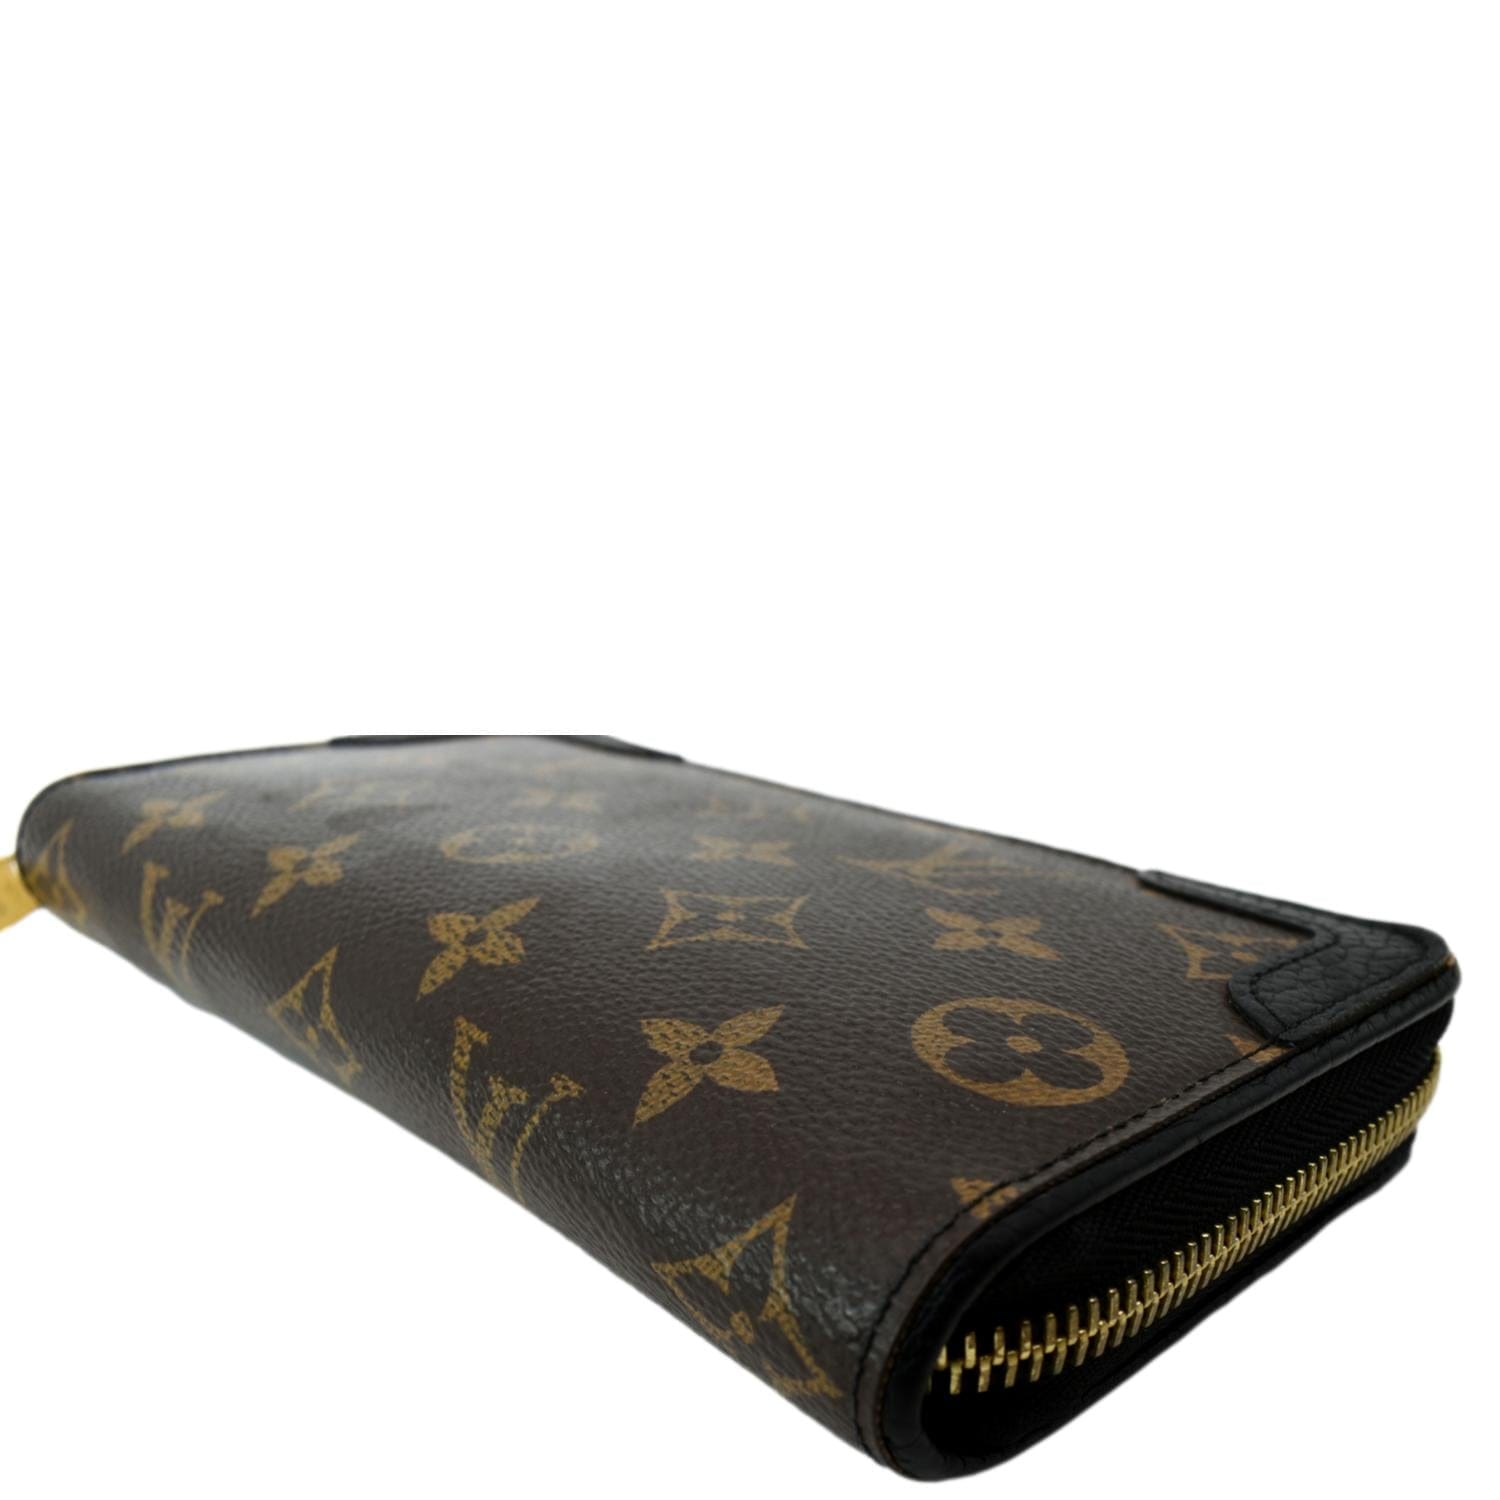 Louis Vuitton Zippy Wallet for Sale in Rancho Cucamonga, CA - OfferUp